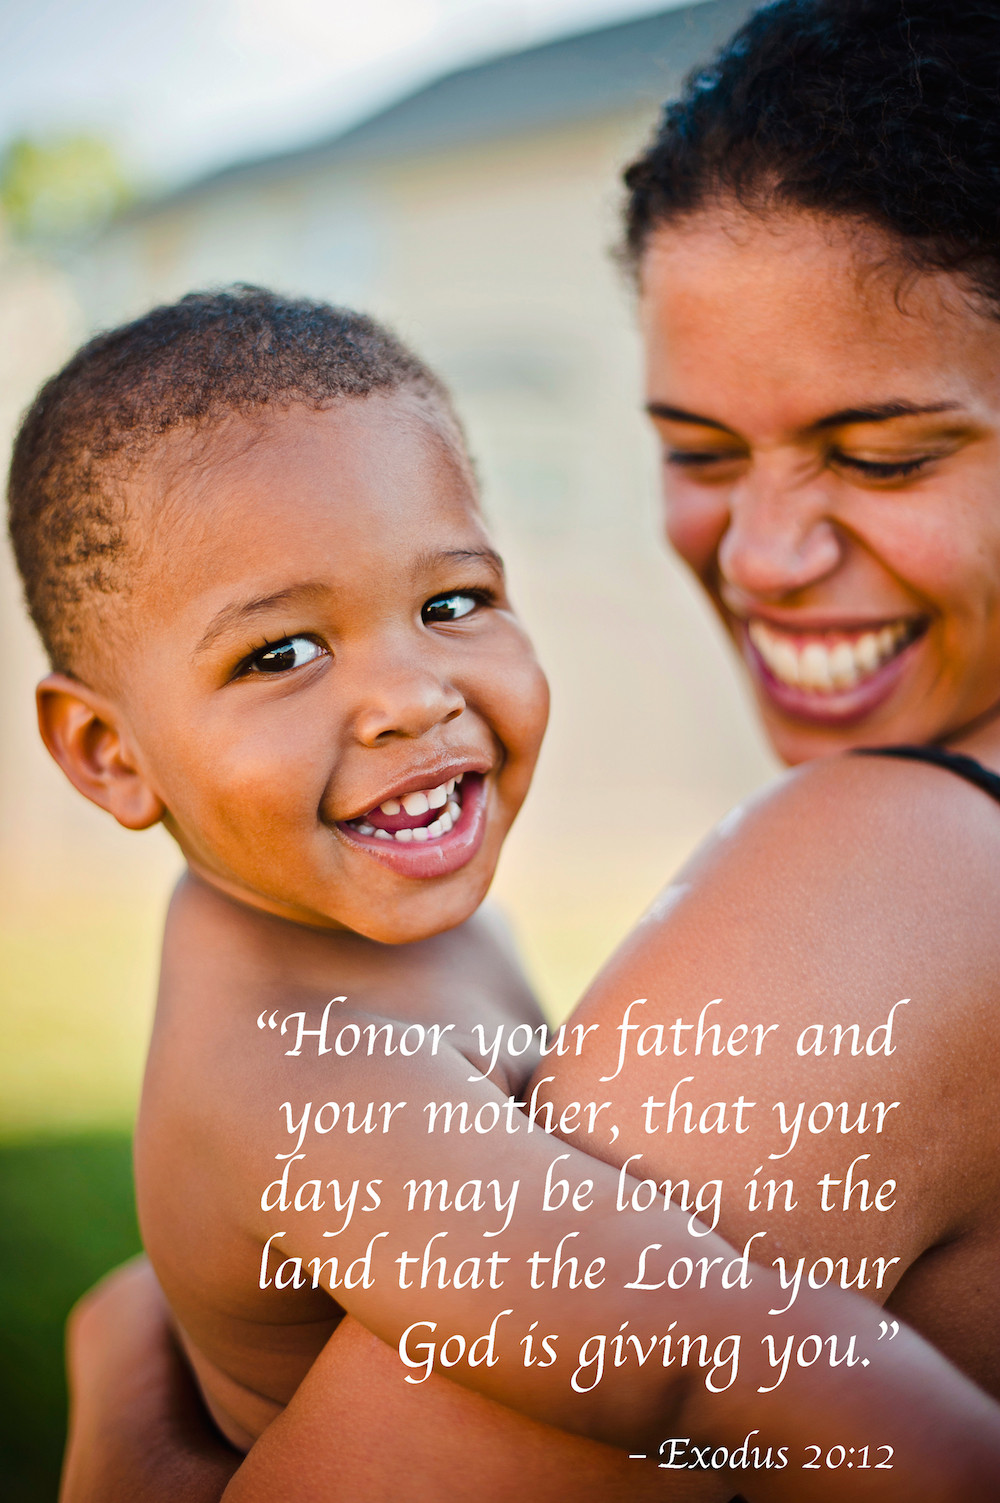 Biblical Quotes About Family
 The 33 Best Bible Verses About Family